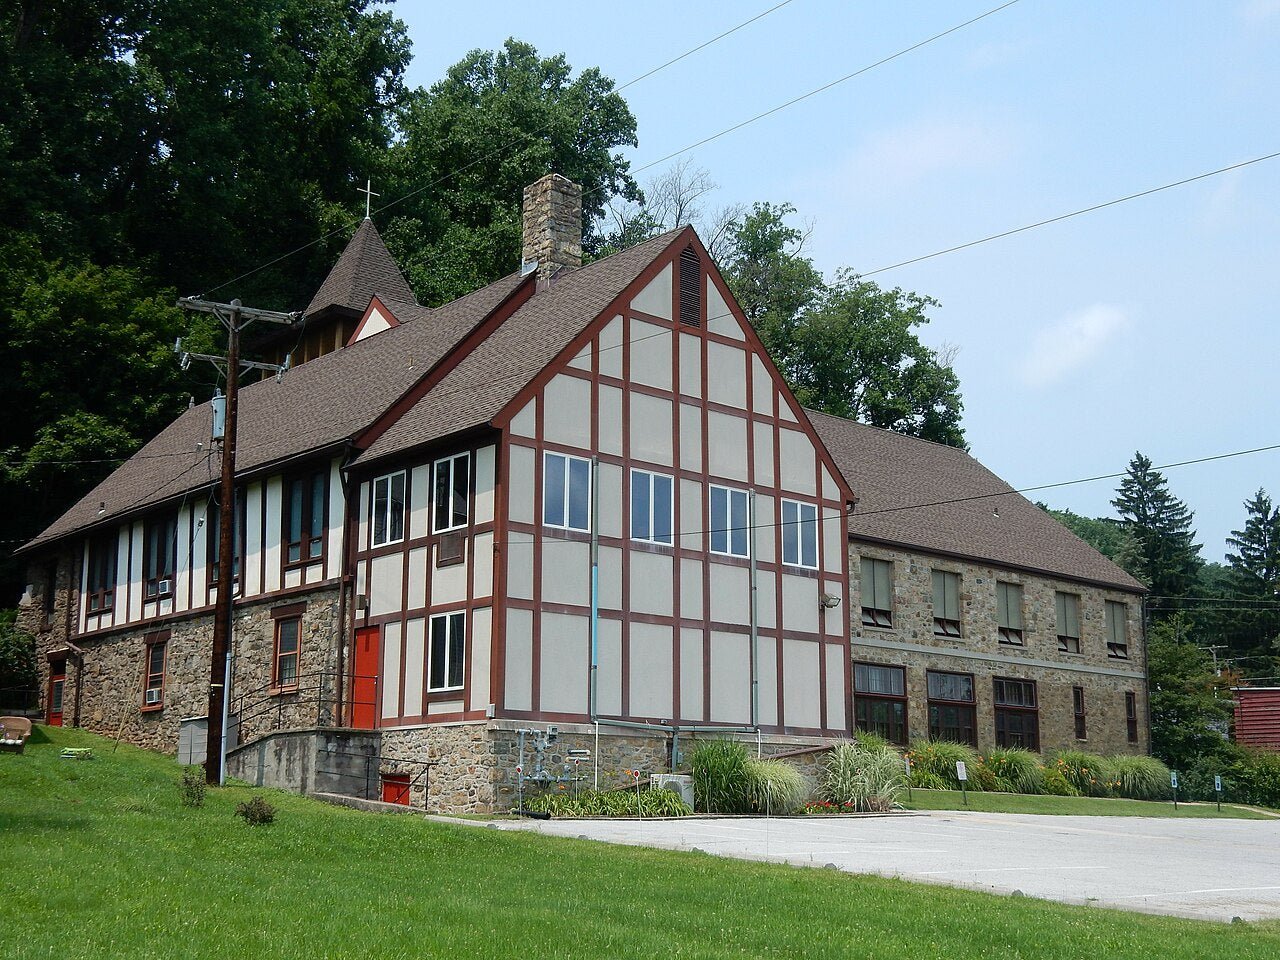 Haus and Hues in Stony Creek Mills